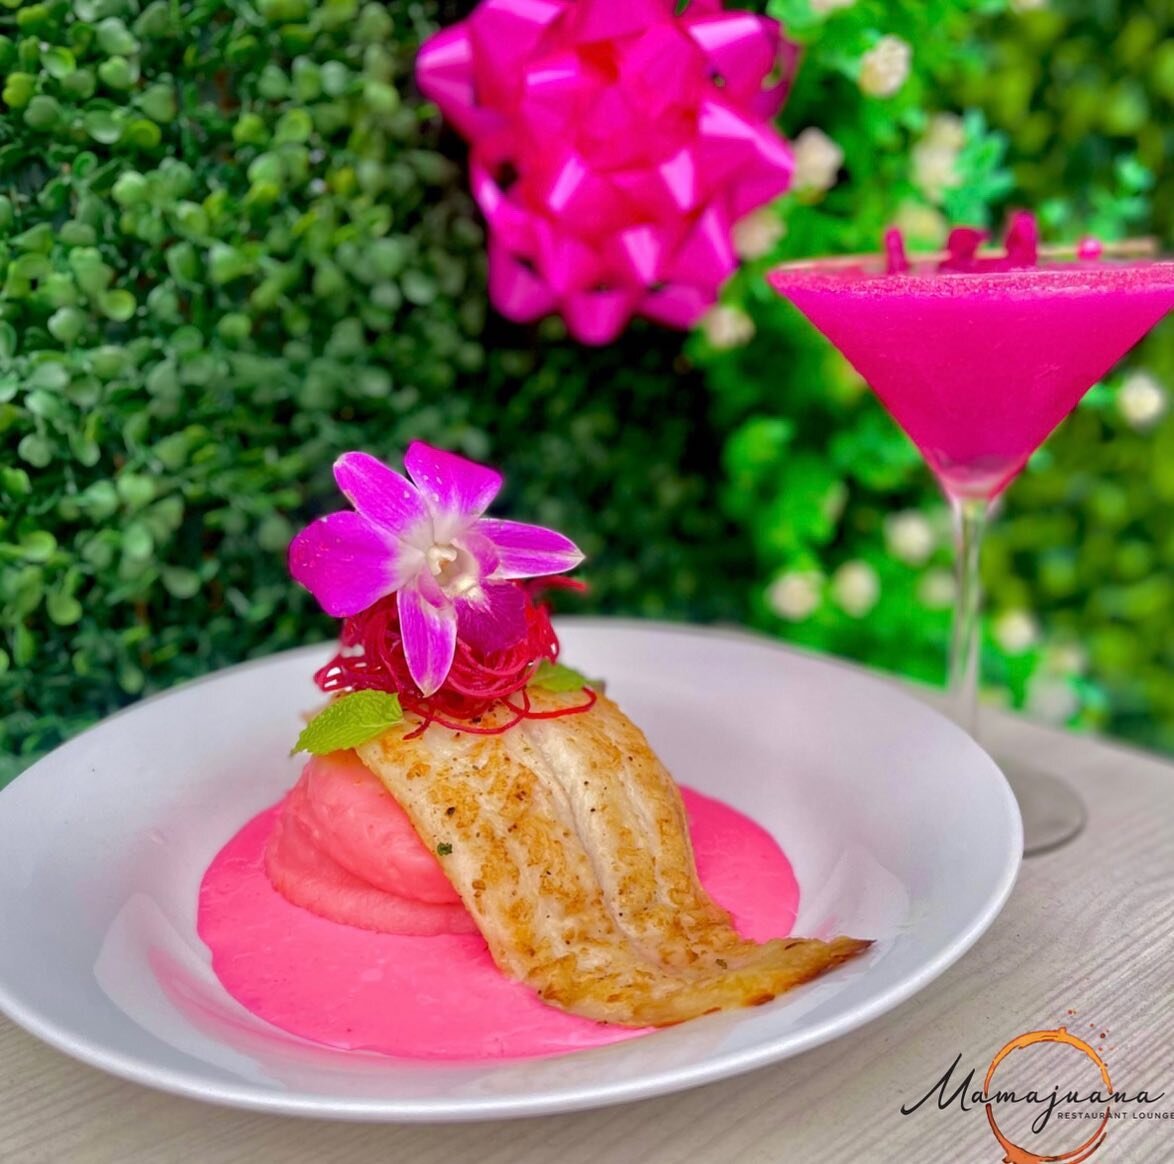 Surprise!👸

 To all our customers, we are also getting on the Barbie vibes with this new dish and drink.🤩💖👸

We have now come up with our  new&hellip;

Barbie Mero, which consists of a Grouper fish filet served over a mashed potatoes, all served 